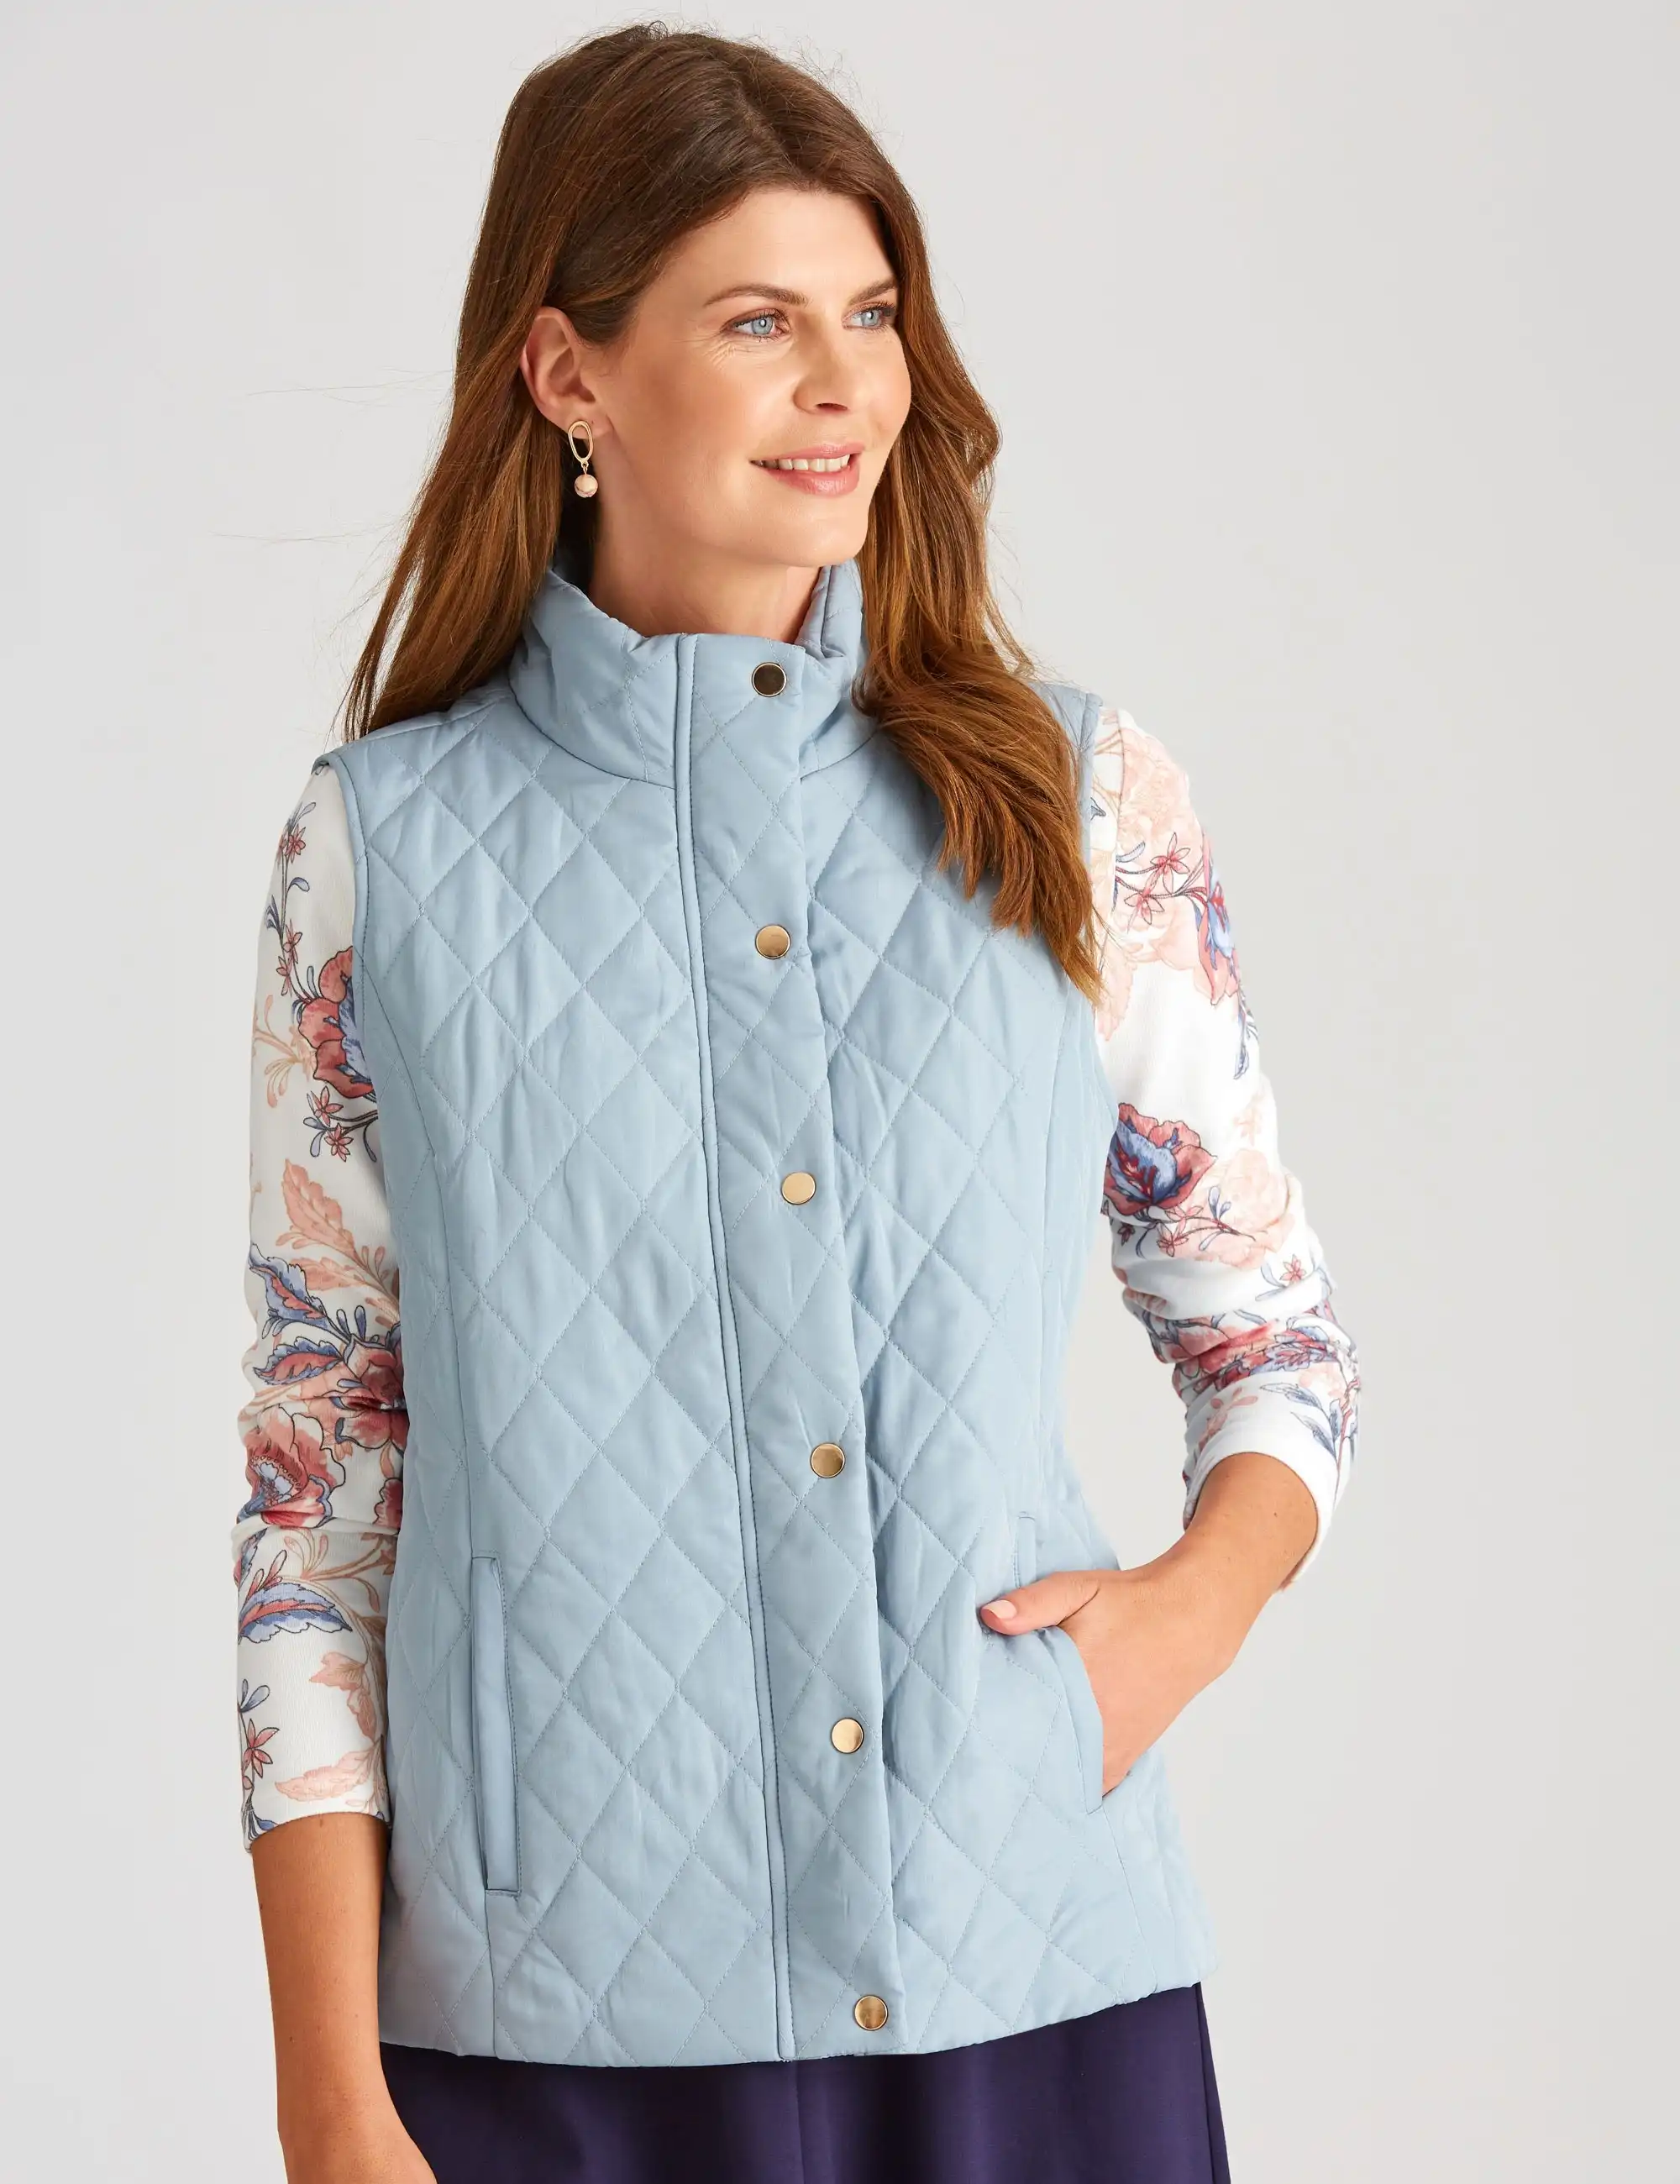 W.Lane Quilted Puffer Vest